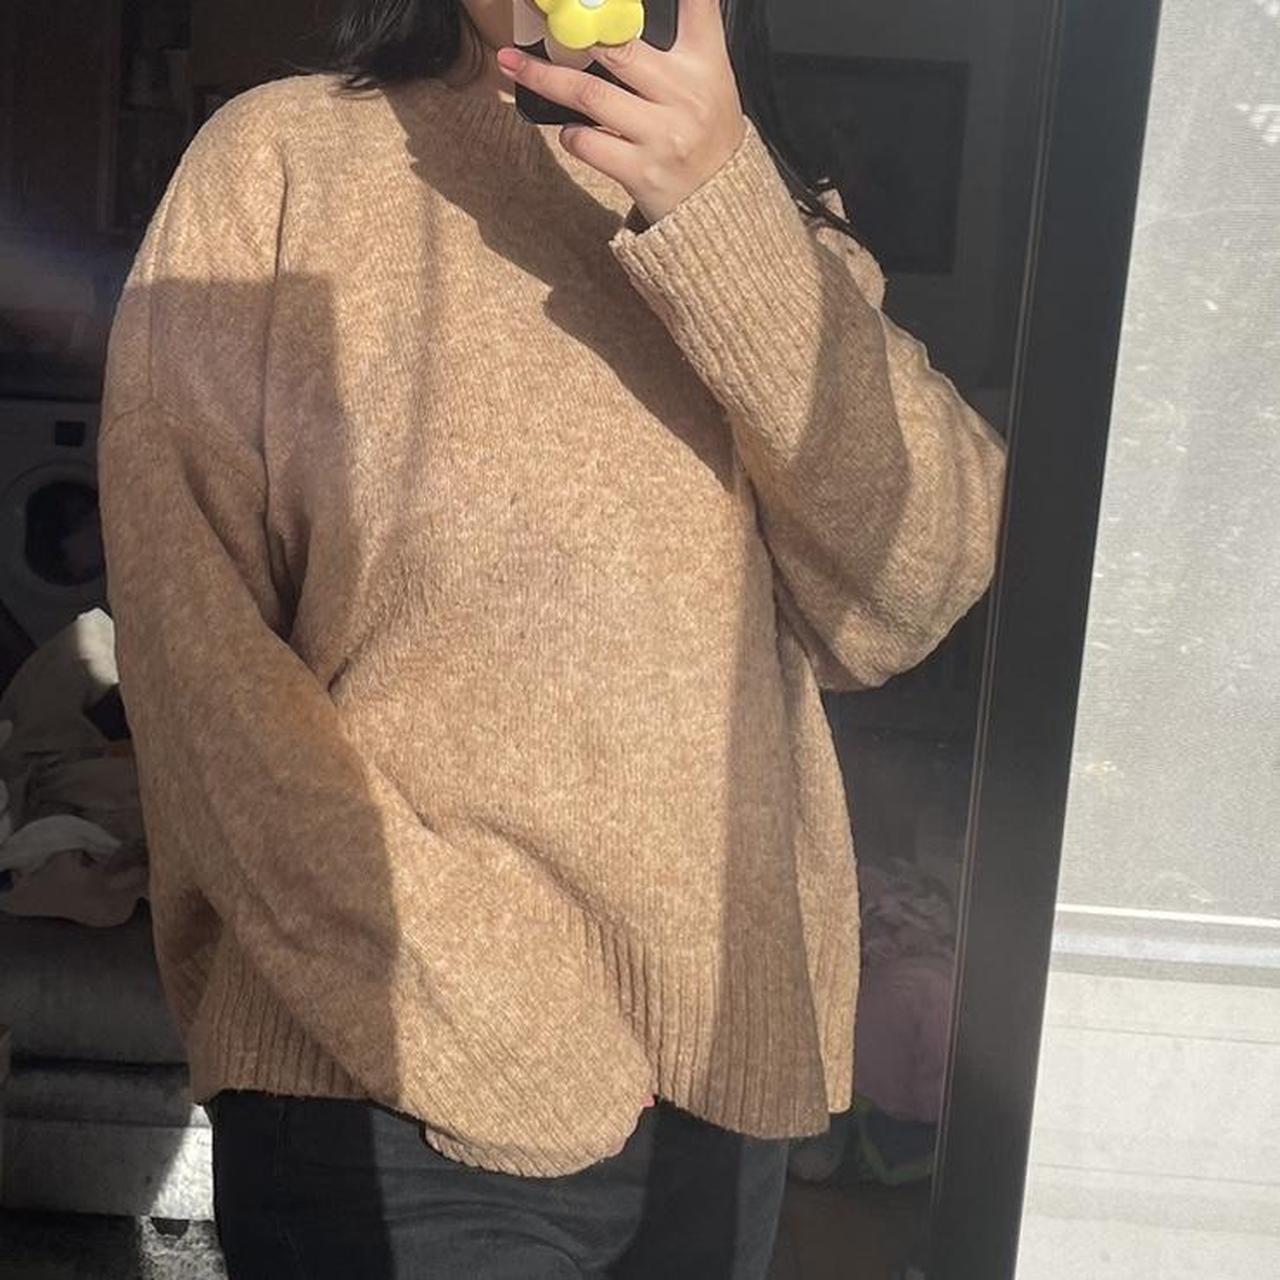 New look : Brown knitted oversized sweater Size M... - Depop